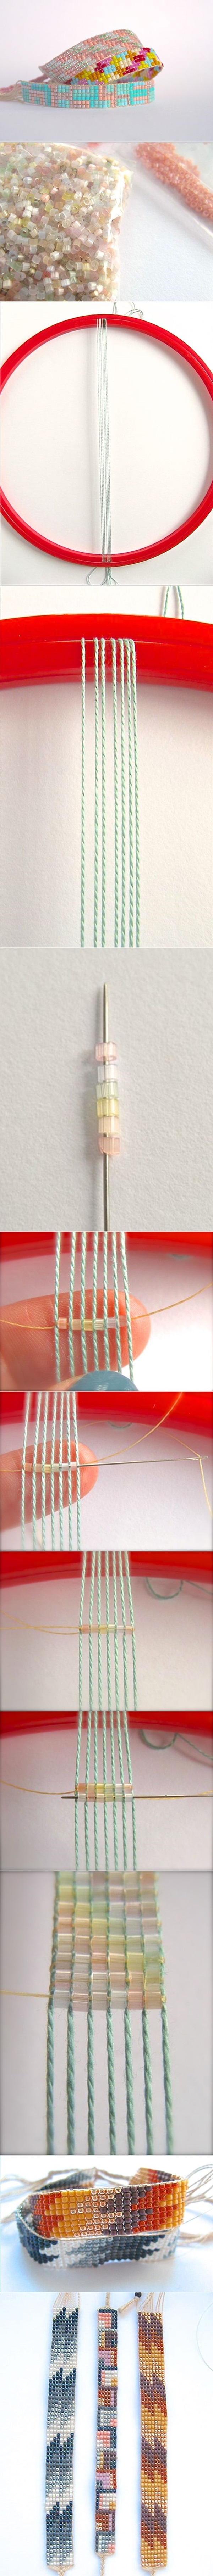 Addictive weaving Tutorials to try this summer (14)